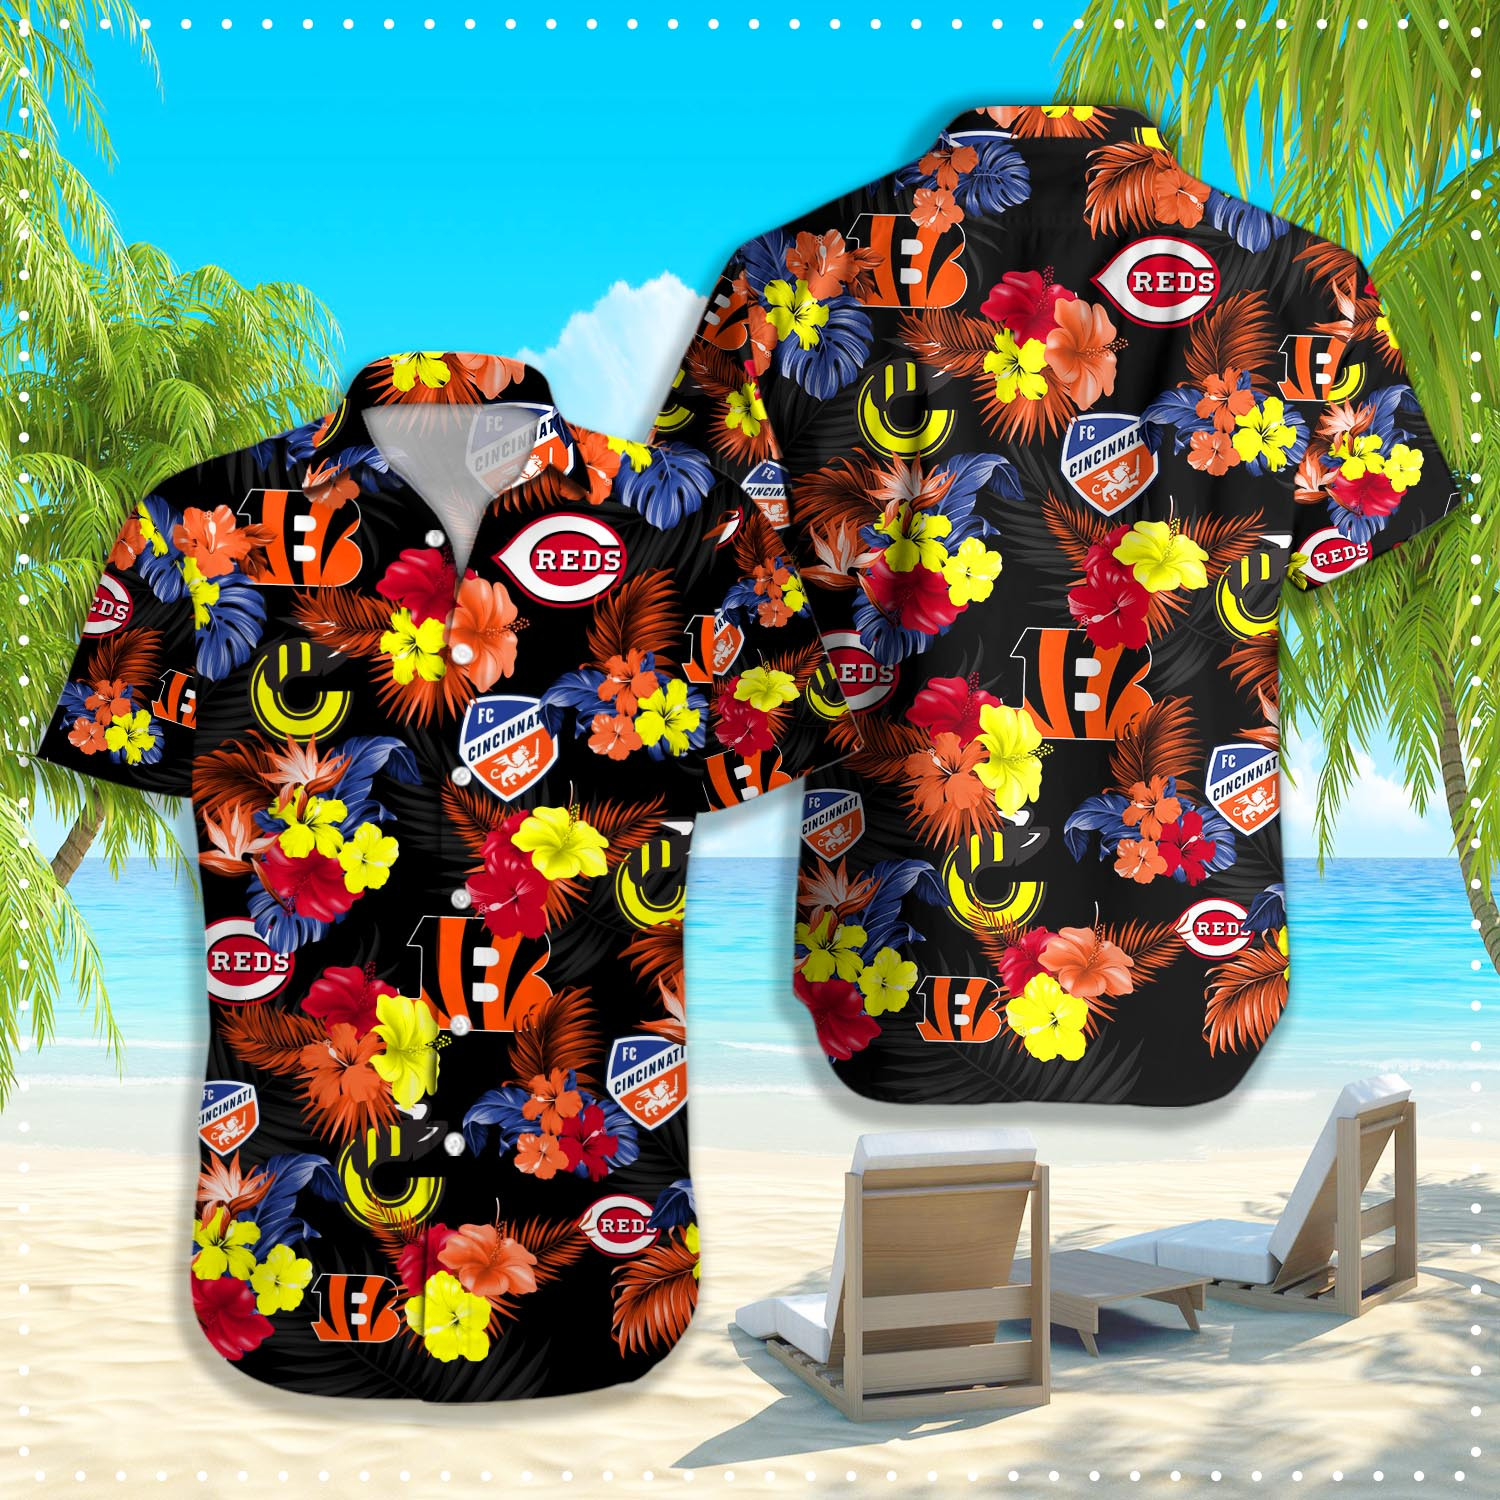 If you are looking for a one-of-a-kind shirt, check it out 76